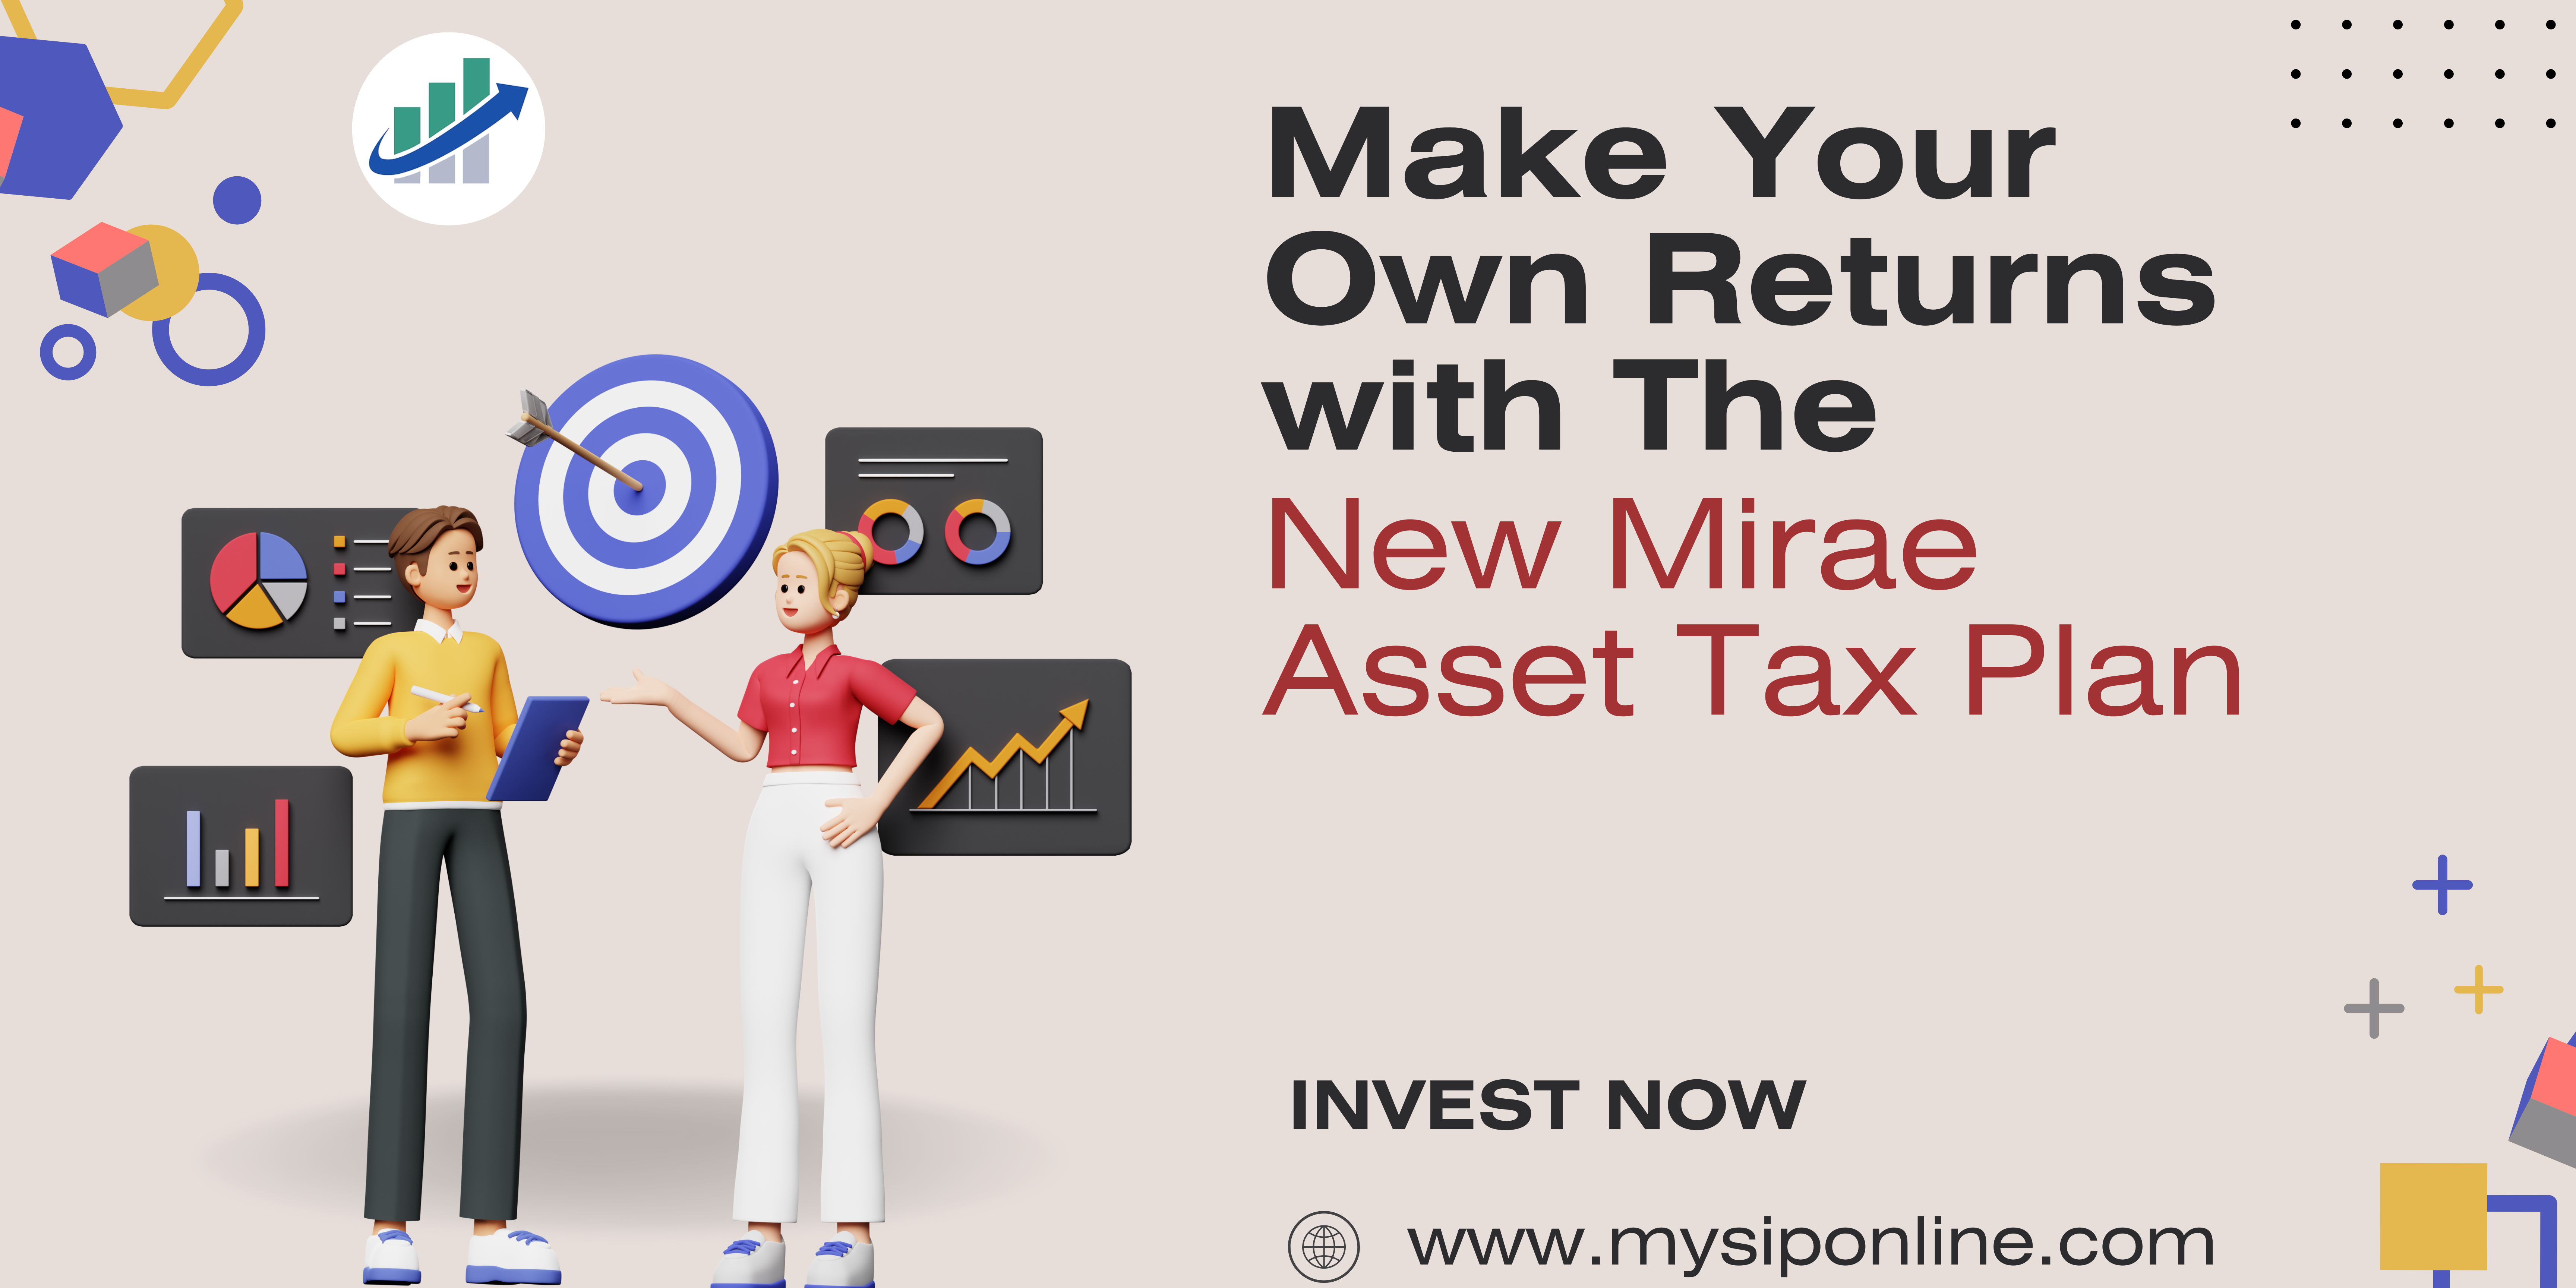 Make Your Own Returns with The New Mirae Asset Tax Plan